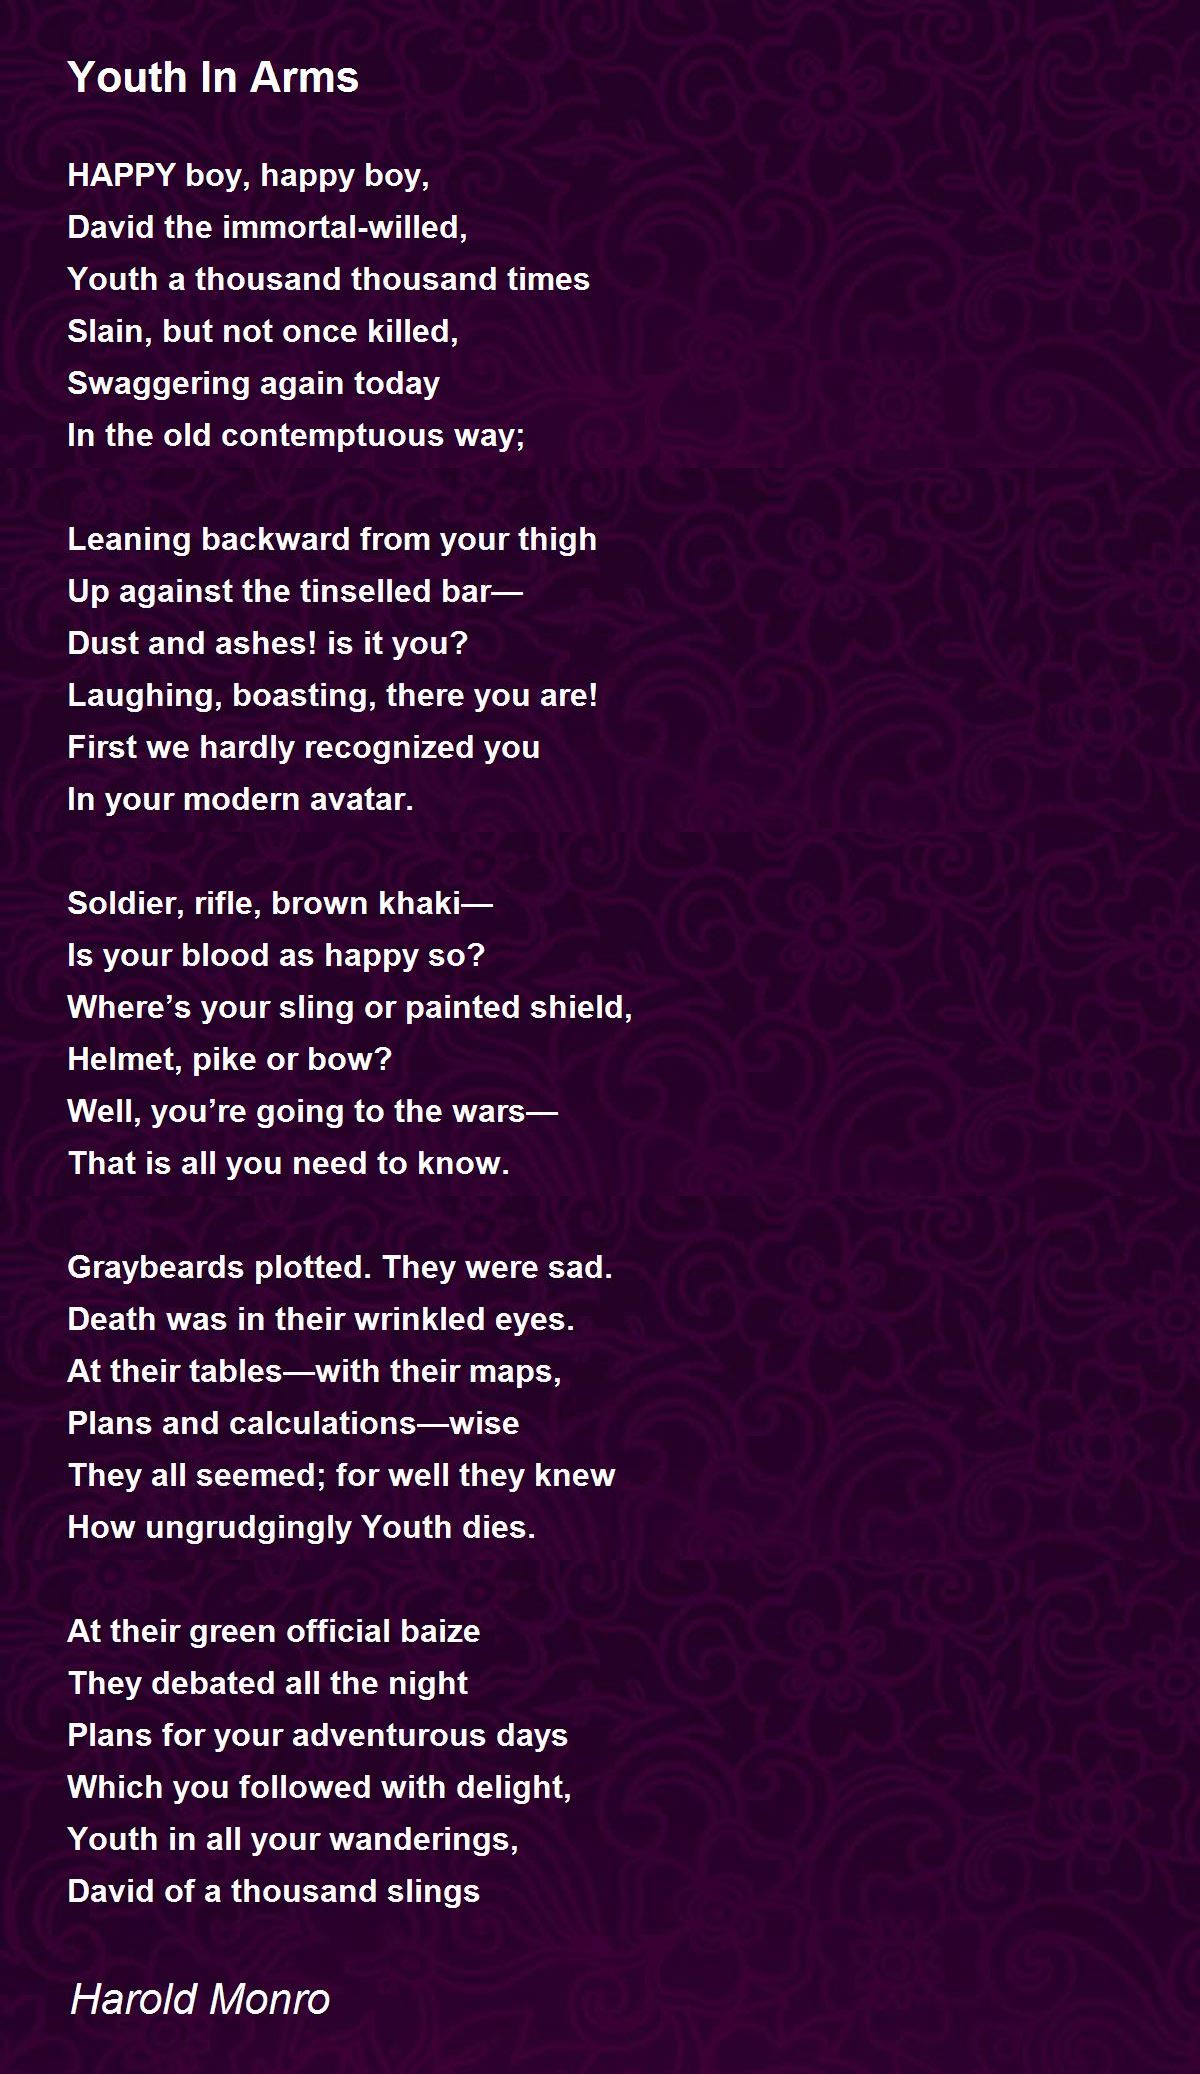 Youth In Arms Poem by Harold Monro - Poem Hunter